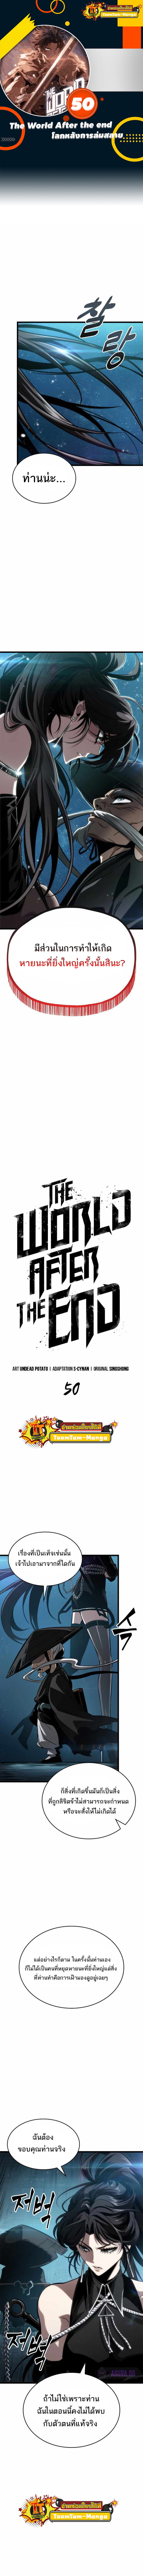 The world after the End 1 12 650001